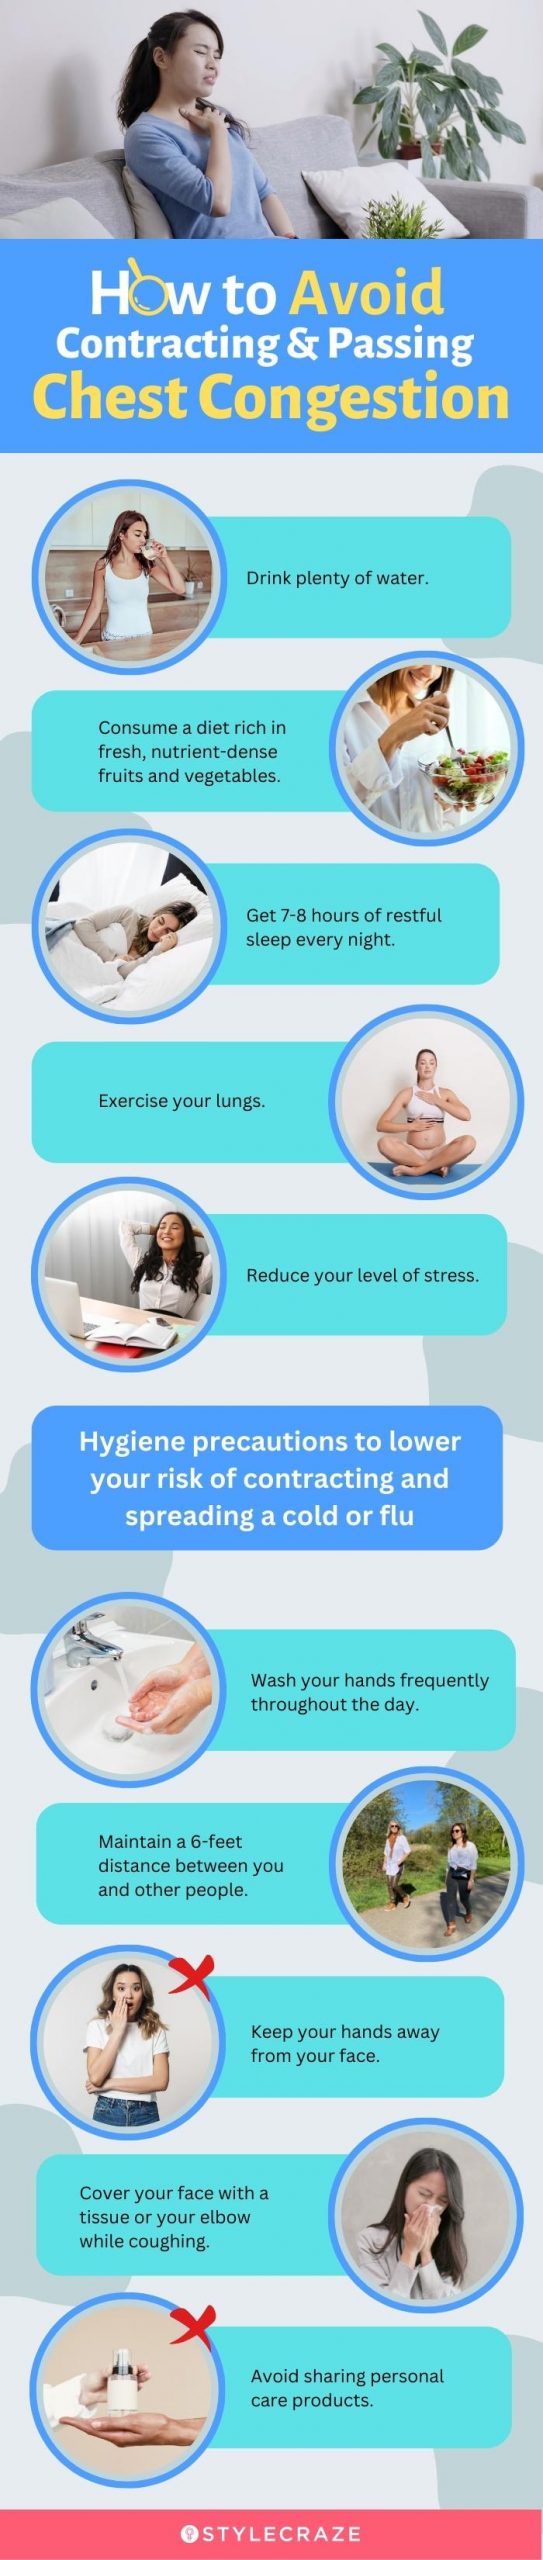 how to avoid contracting & passing chest congestion (infographic)